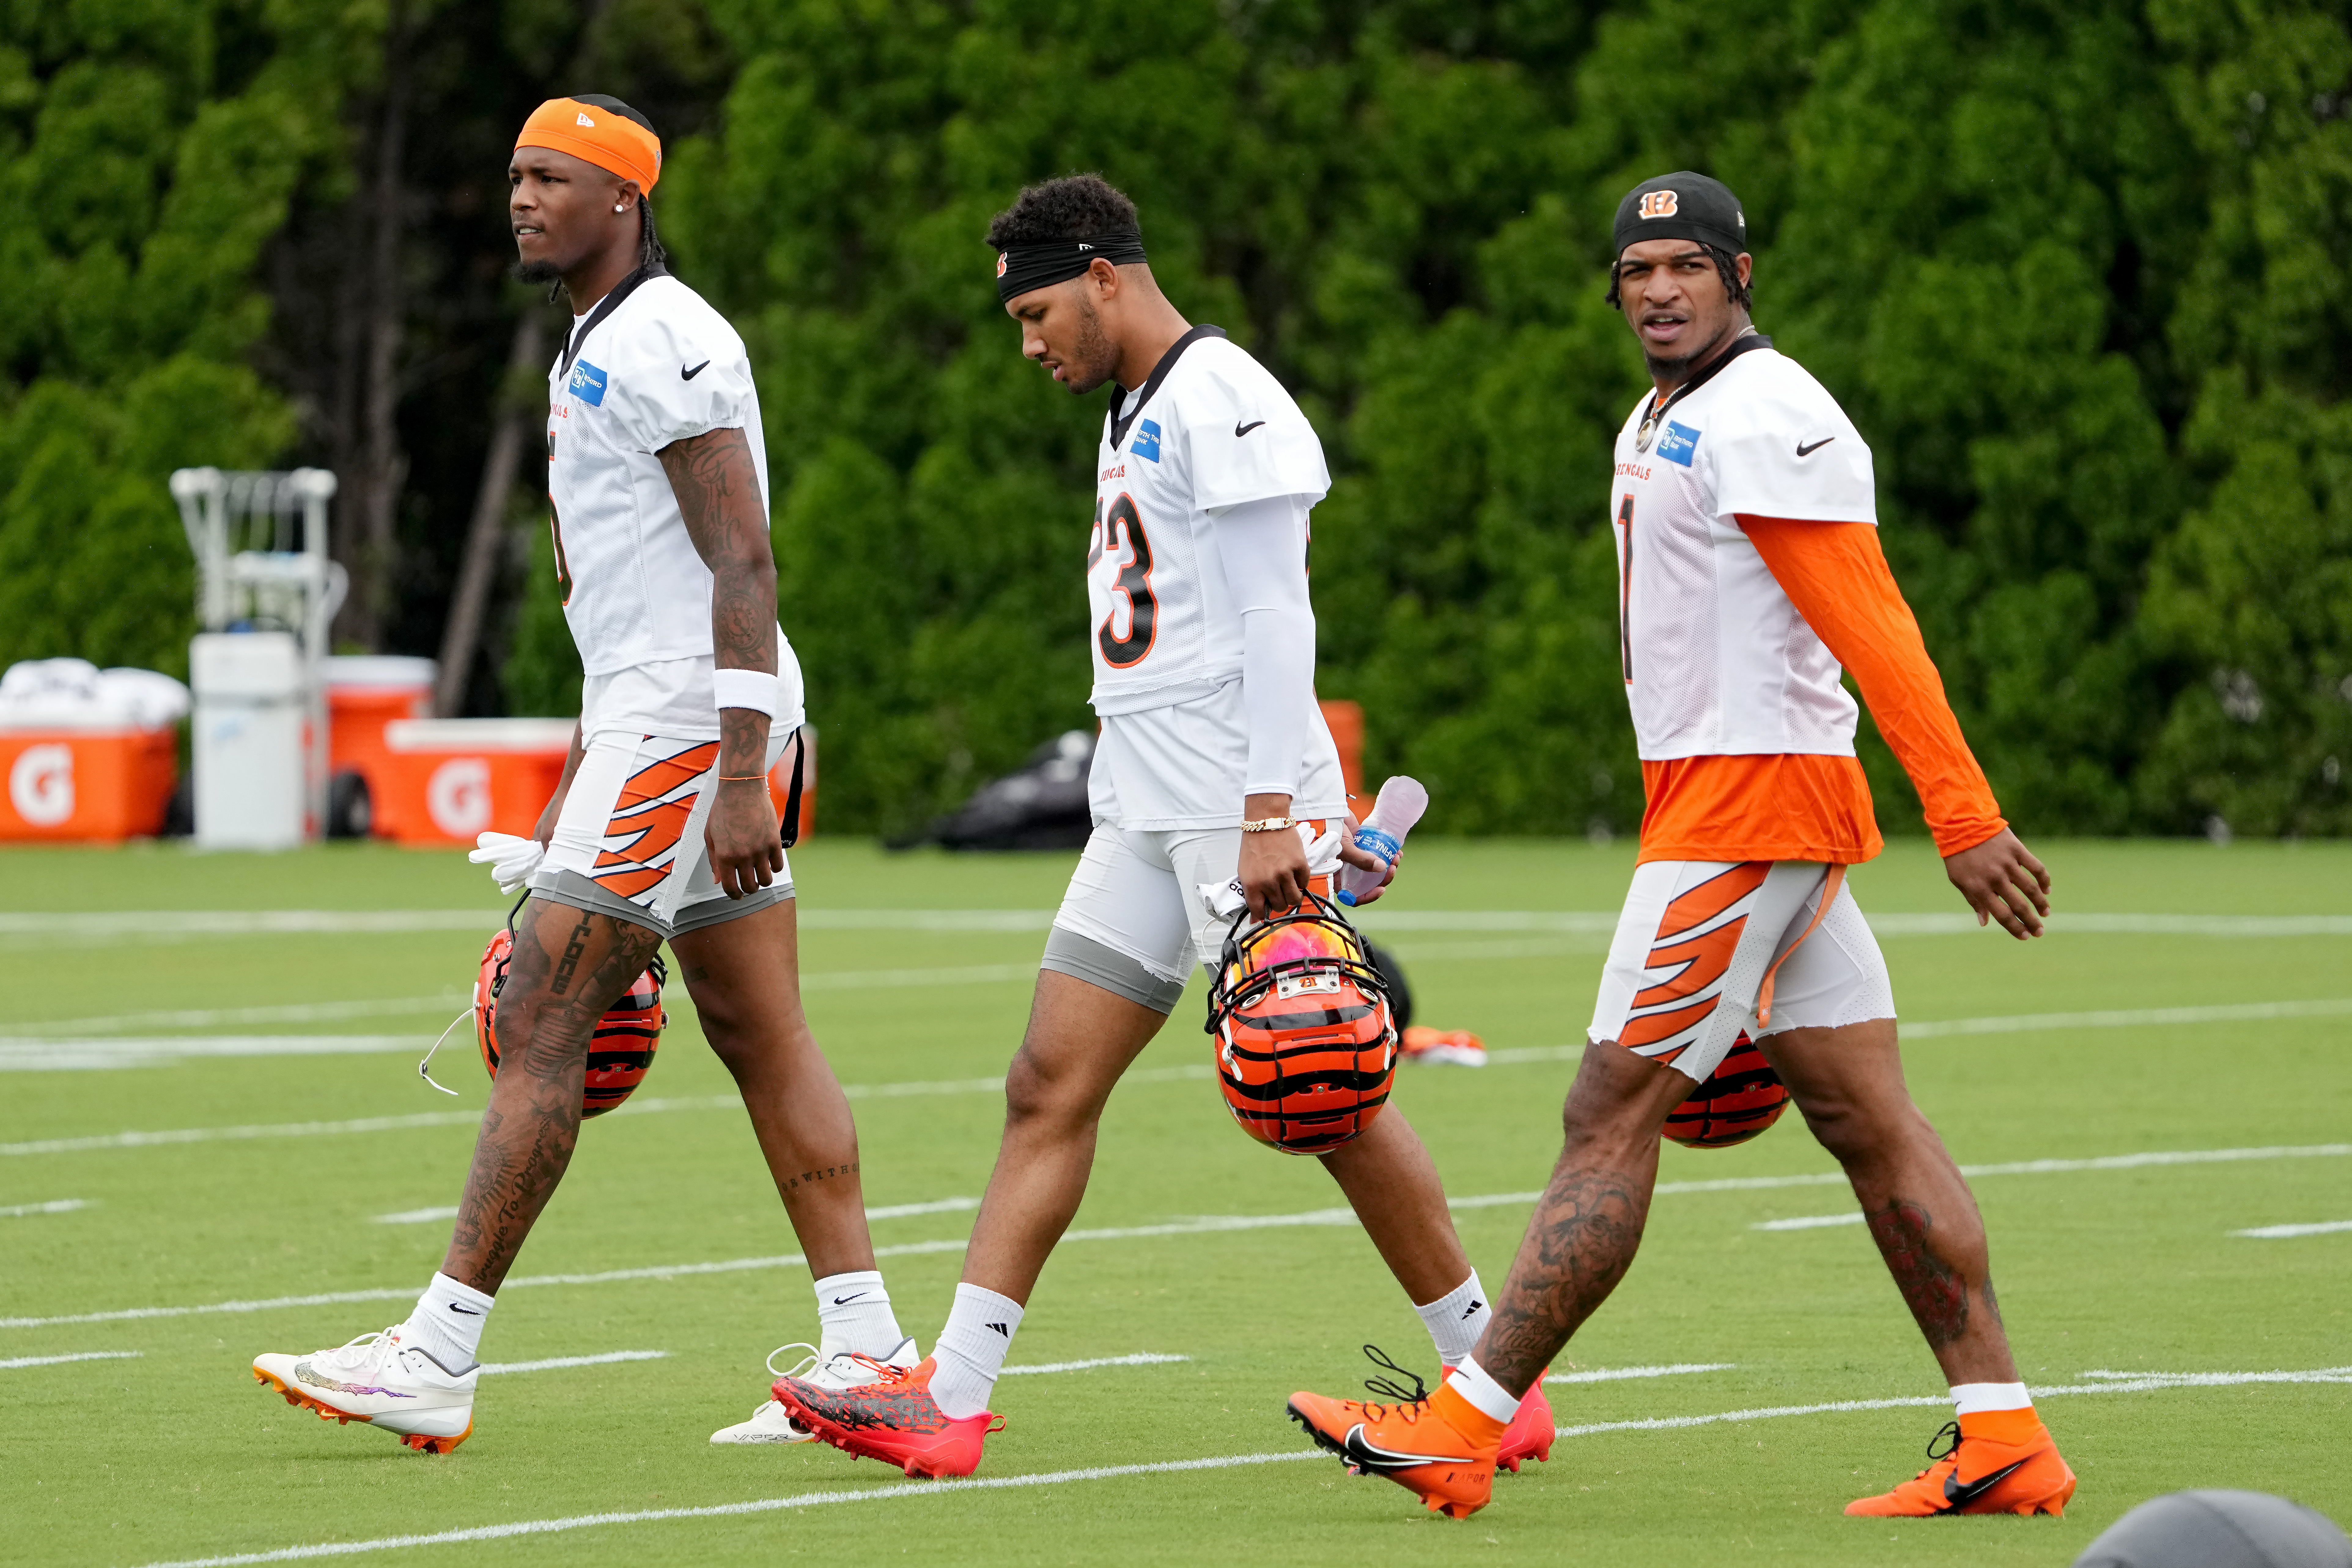 CINCINNATI, OHIO - JULY 26: Tee Higgins #5, Tyler Boyd #83, and Ja'Marr Chase #1 of the Cincinnati Bengals walk across the field during training camp at Kettering Health Practice Fields on July 26, 2023 in Cincinnati, Ohio. Dylan Buell/Getty Images